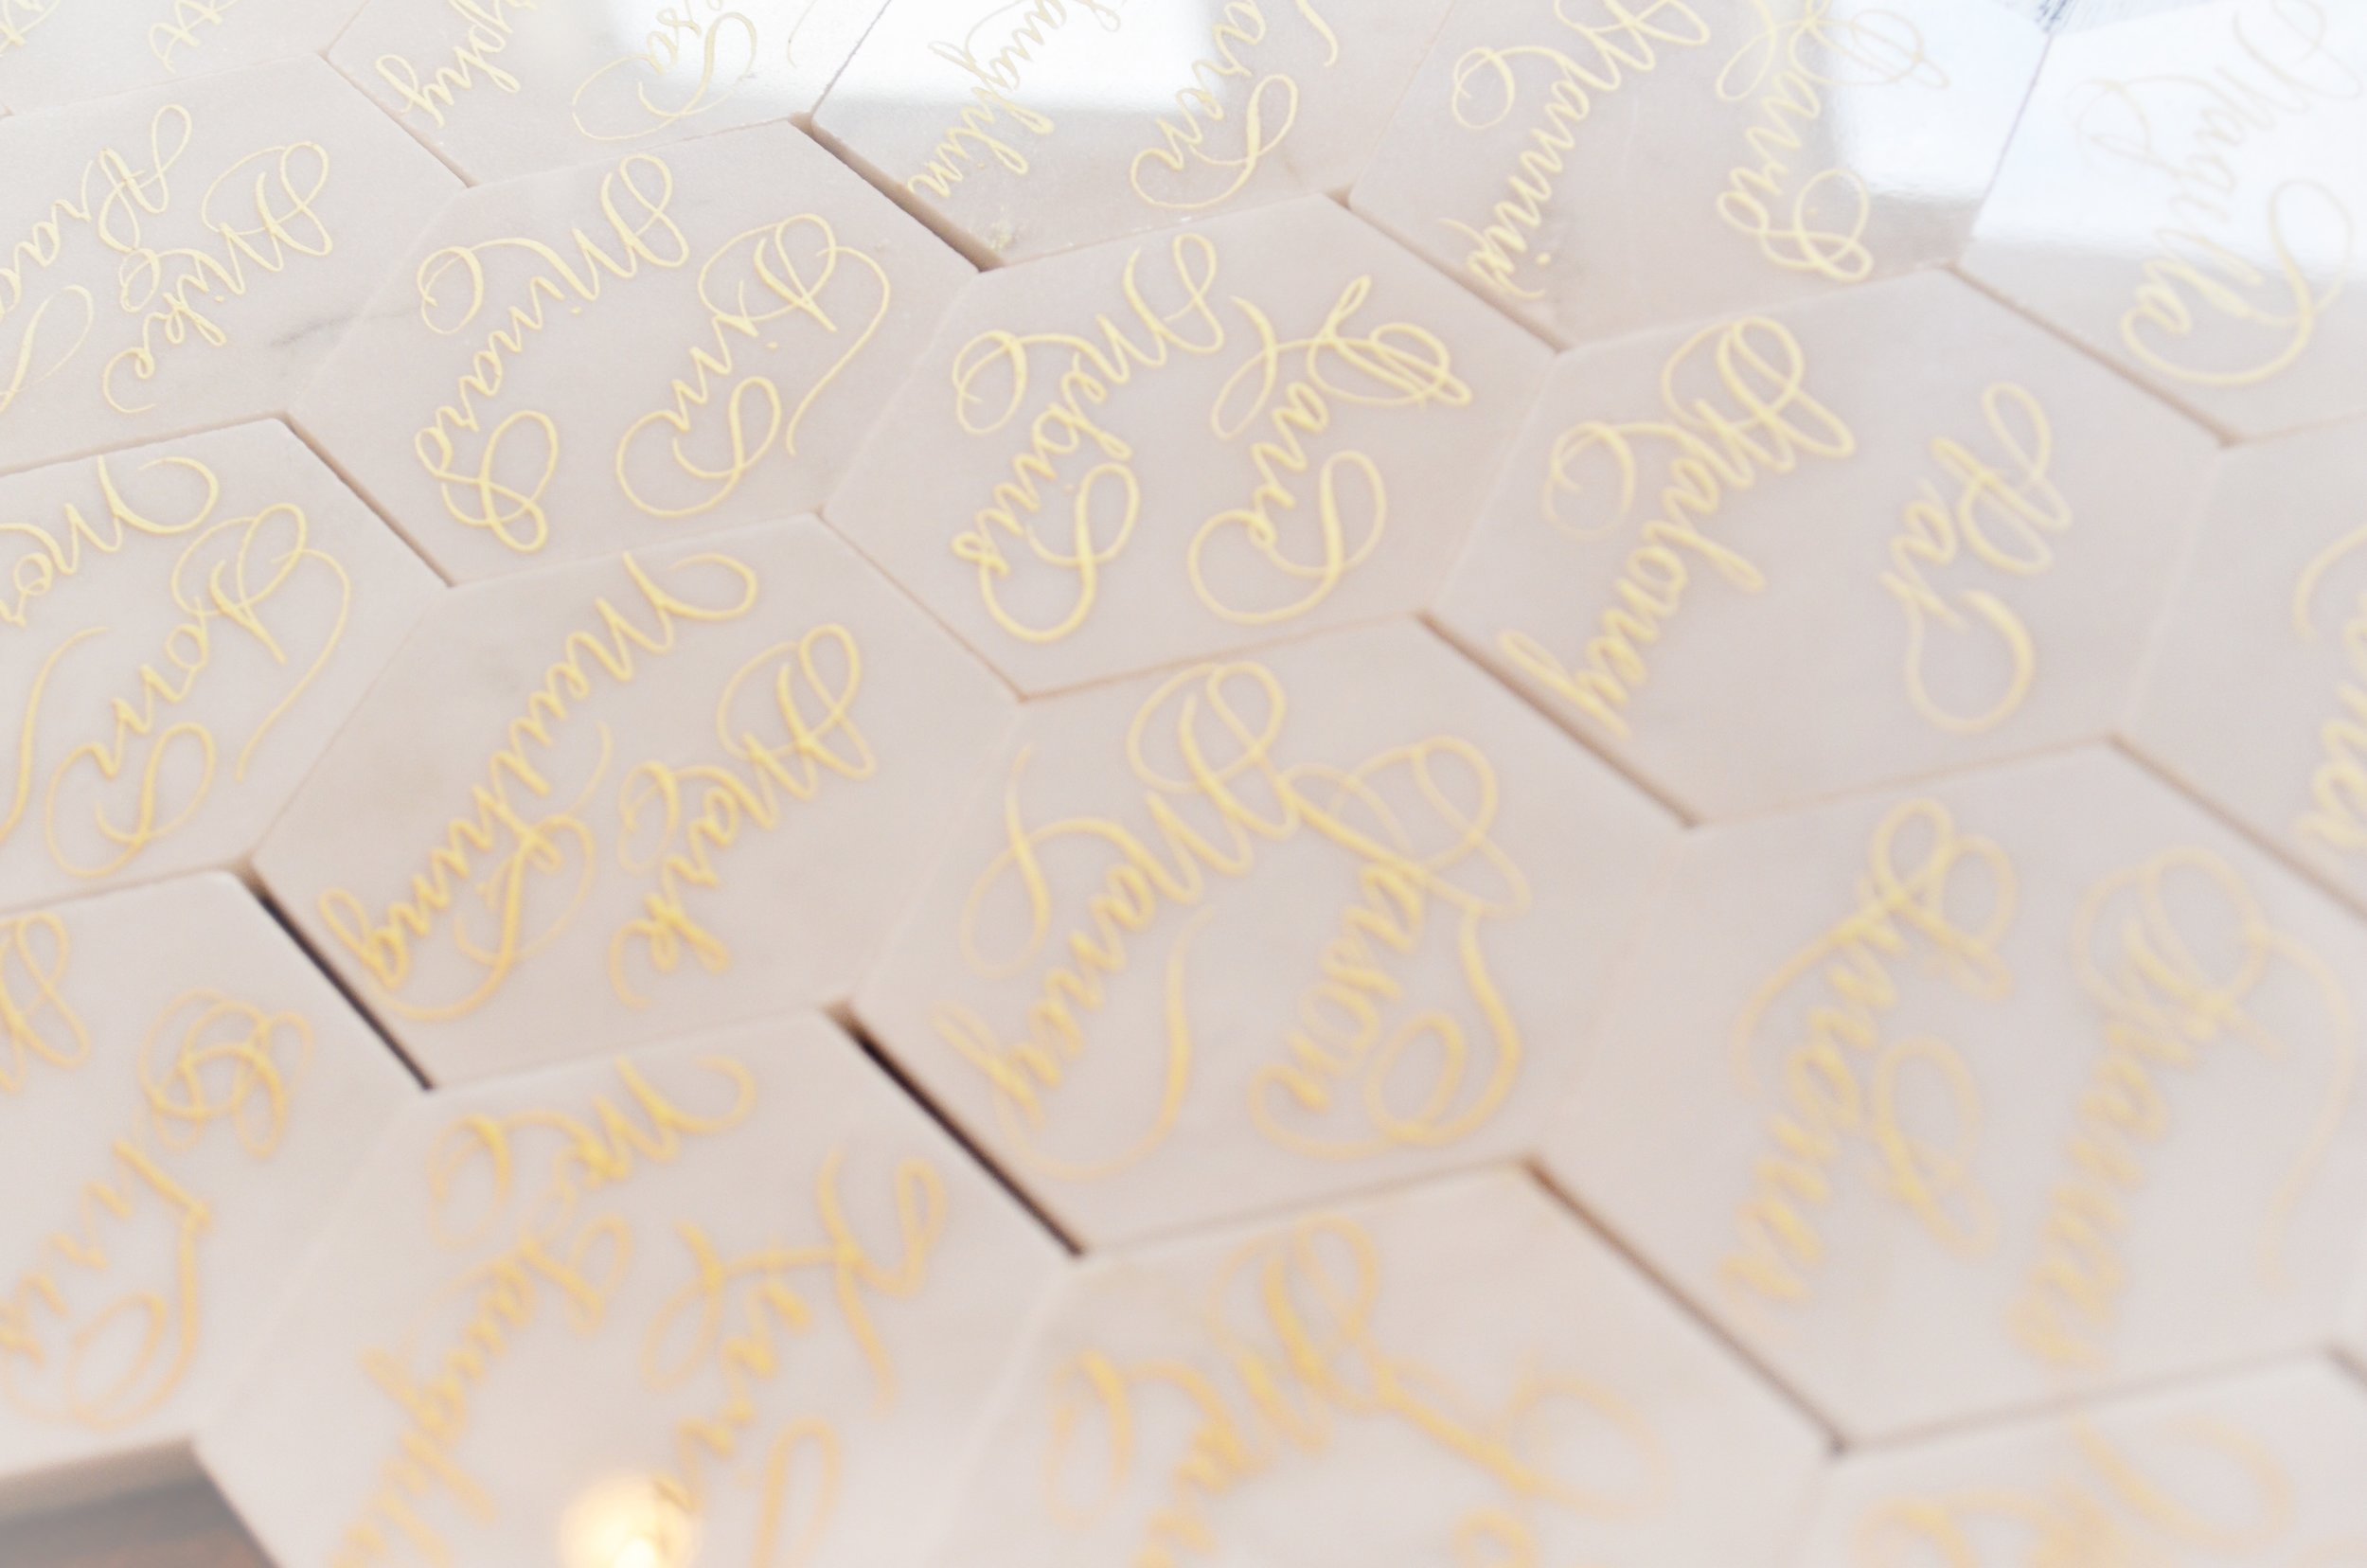 White Marble Calligraphy Place card Houston Los Angeles New York Miami 4.JPG